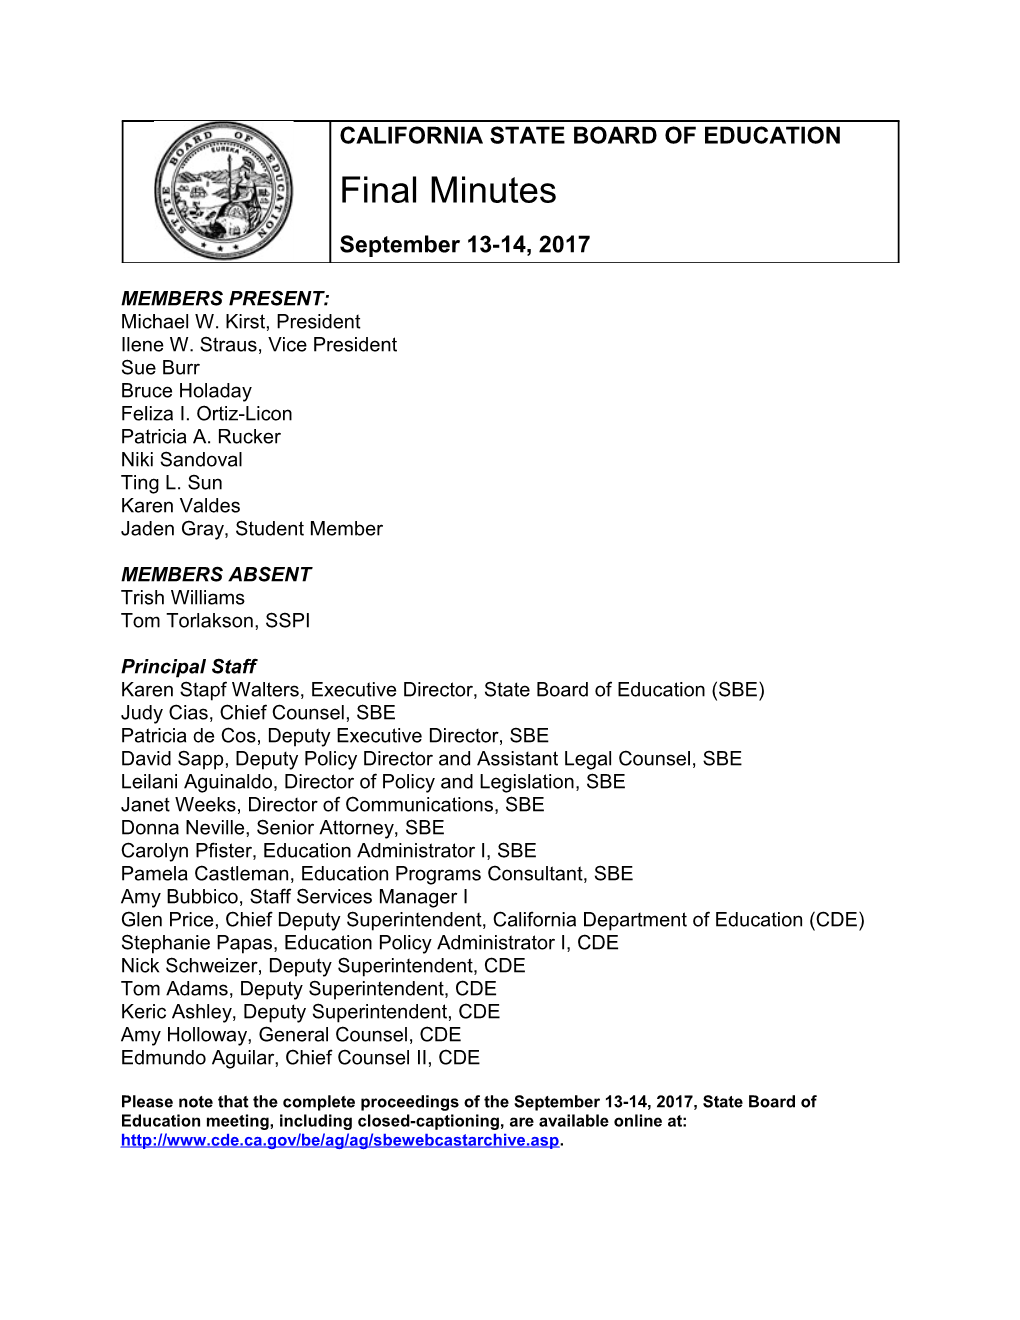 Final Minutes for September 2017 - SBE Minutes (CA State Board of Education)